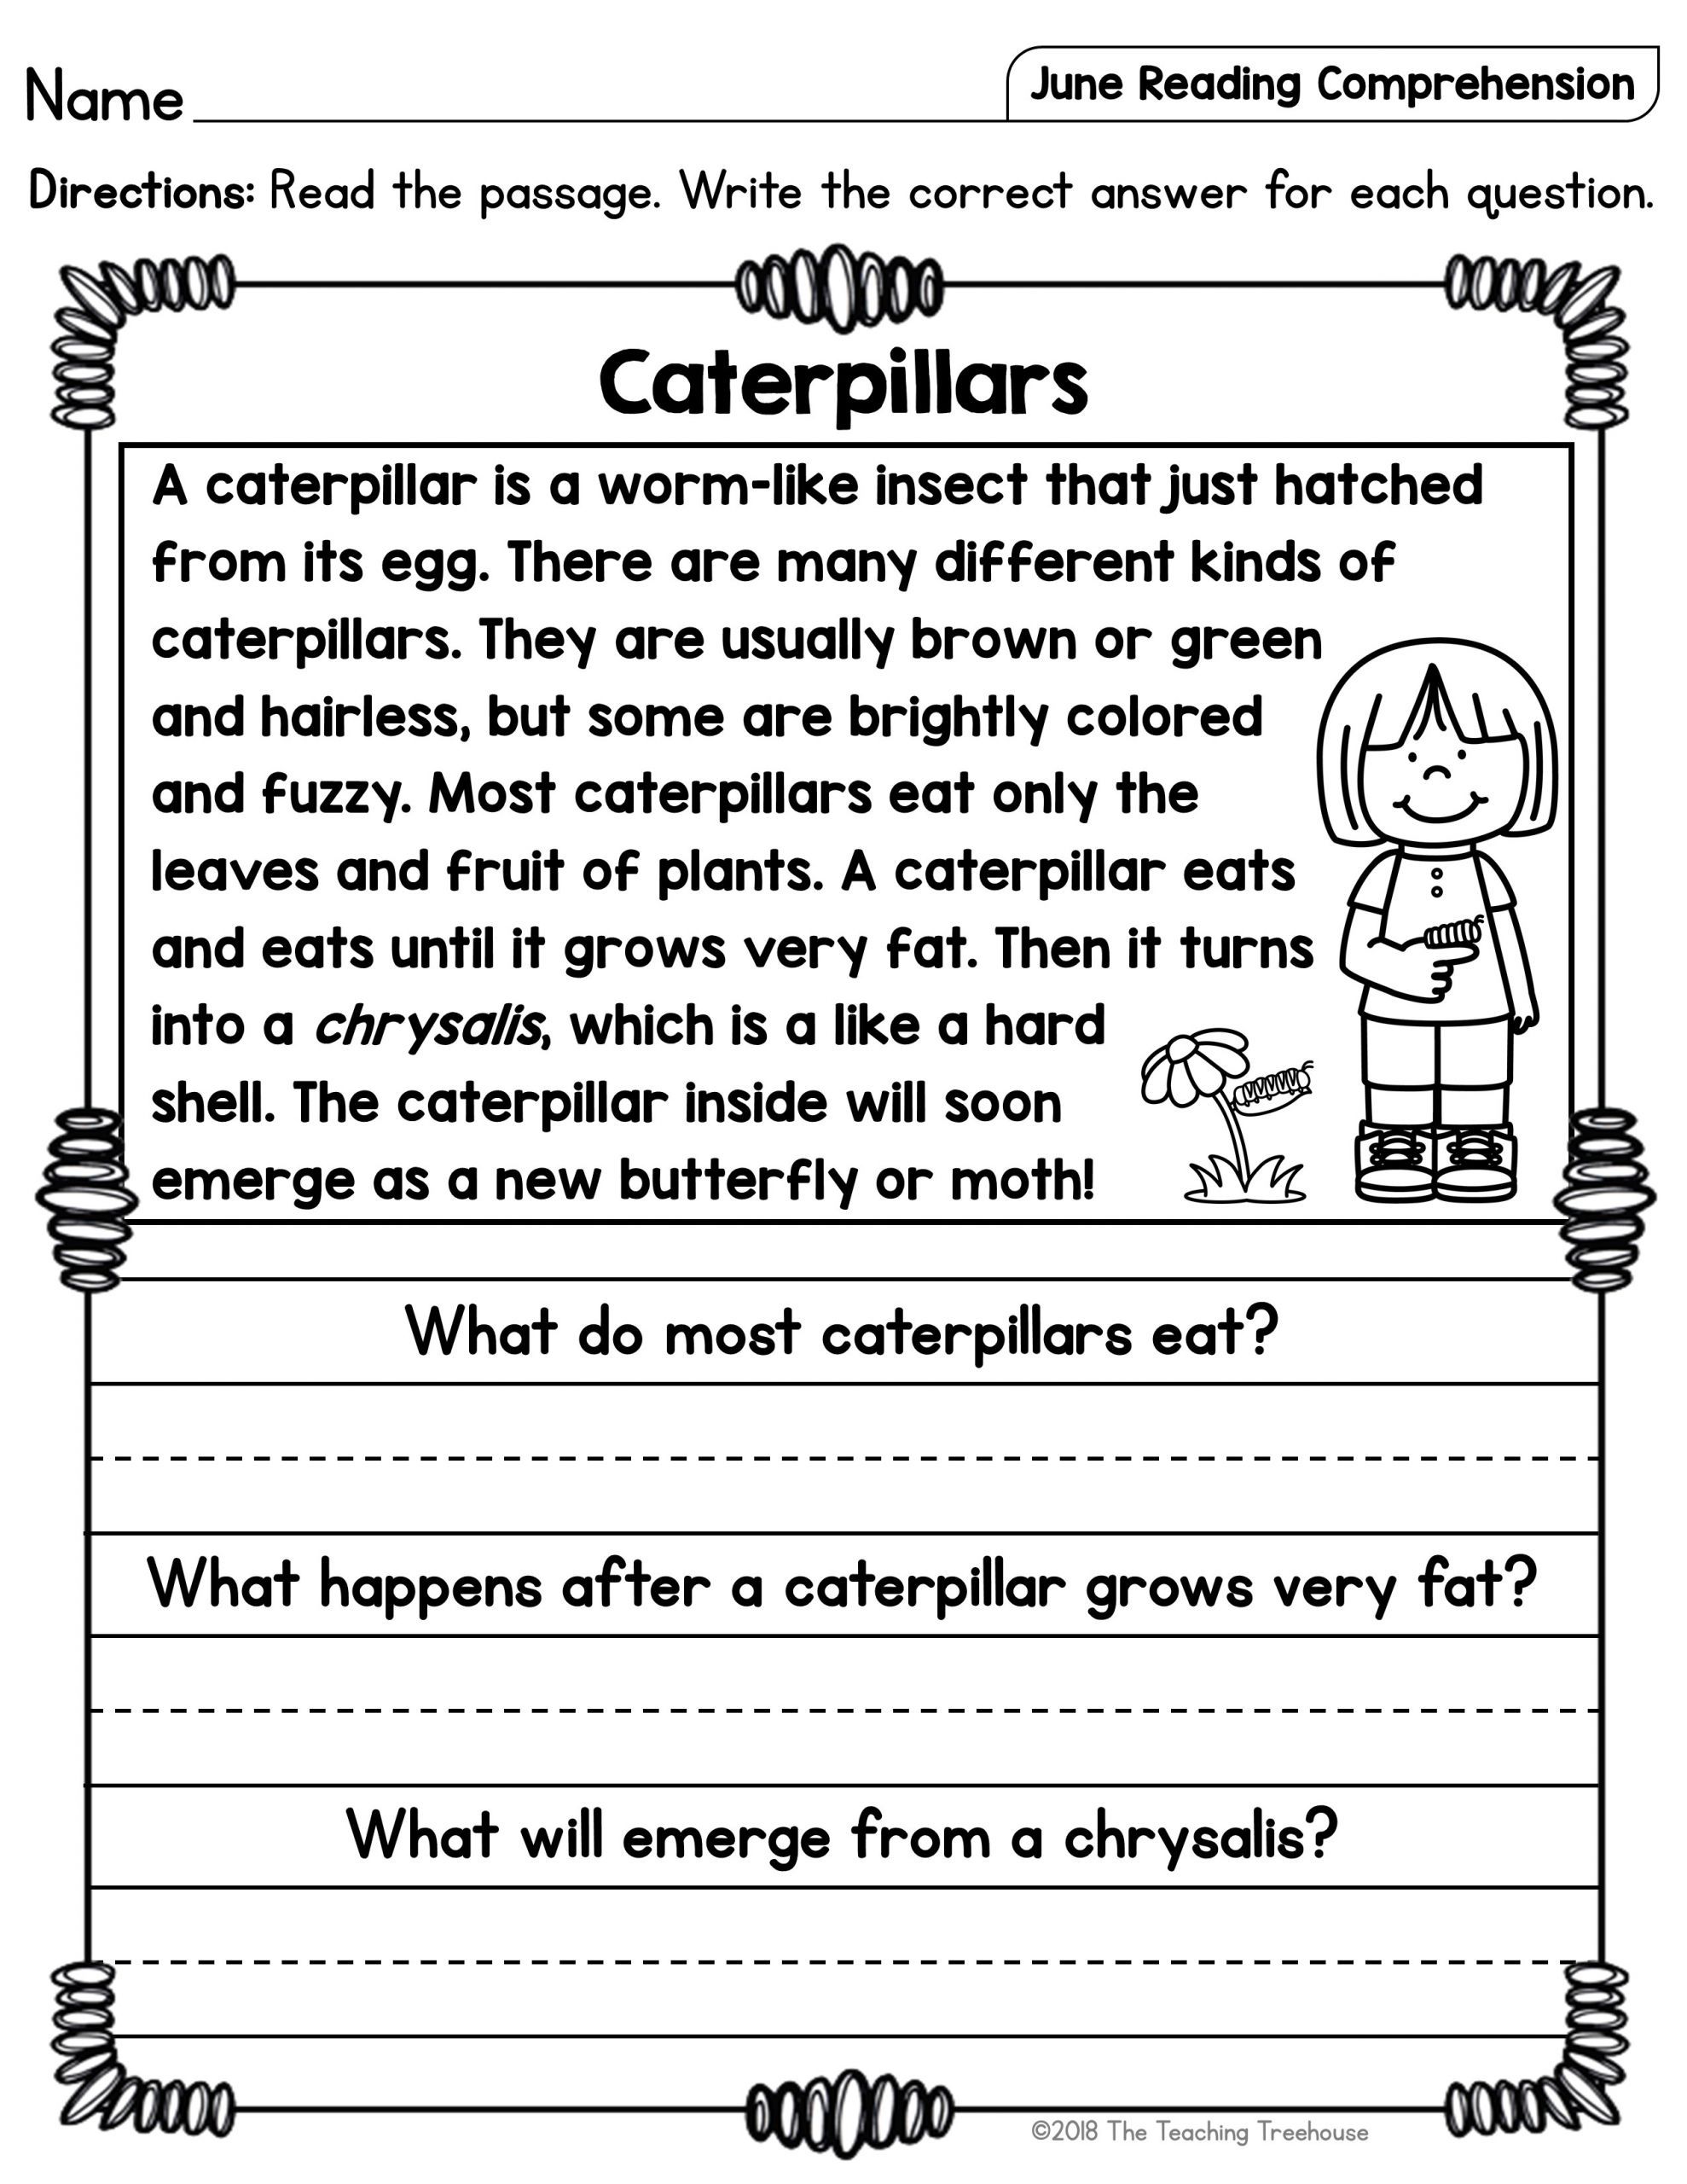 Year 4 Comprehension Text